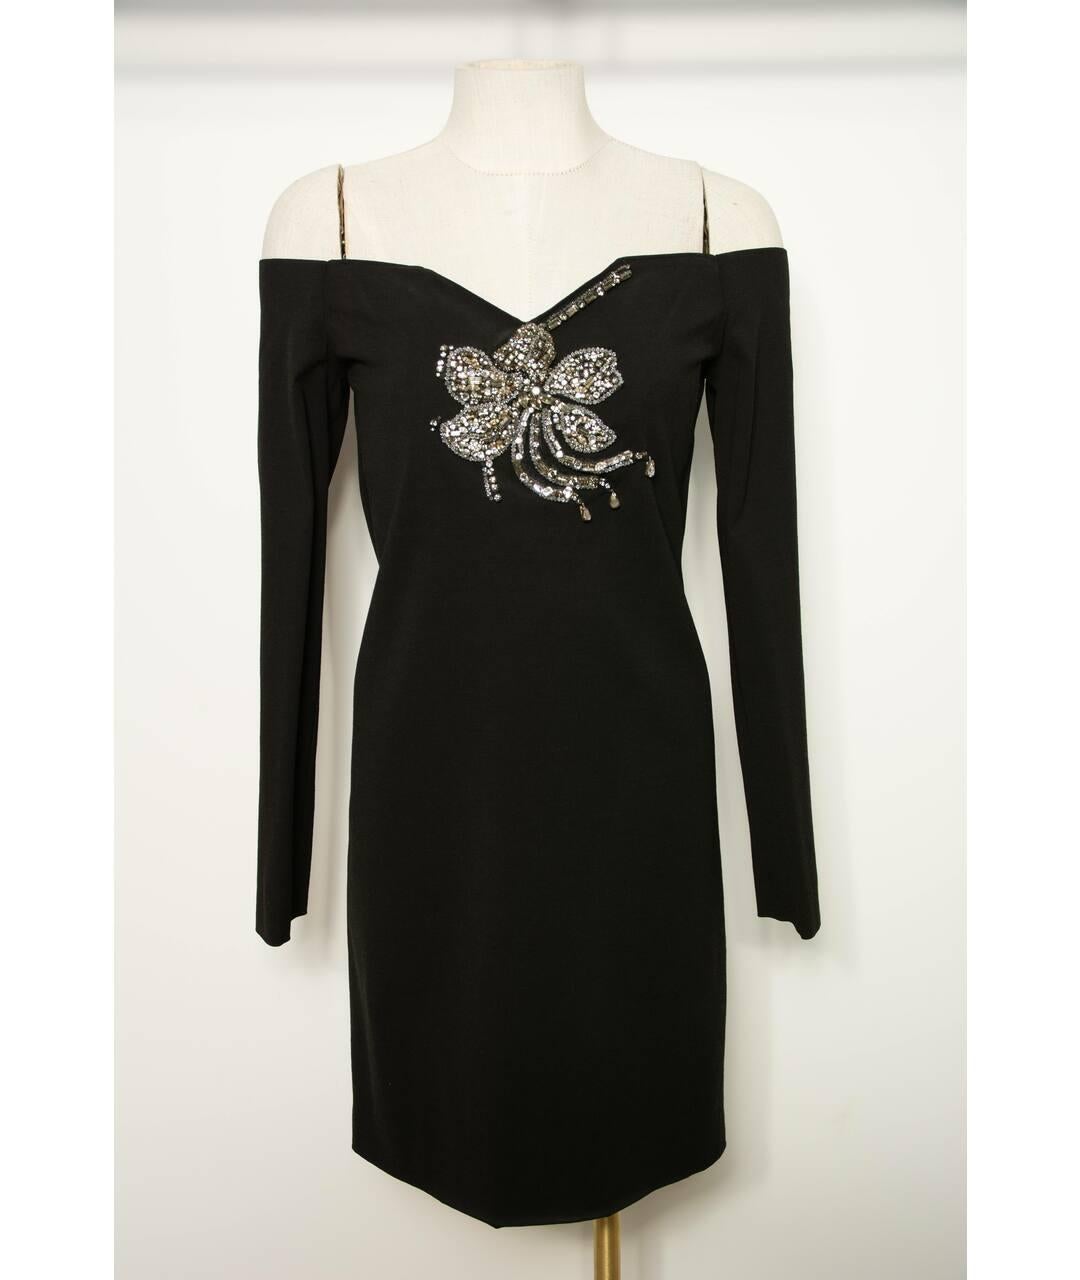 LANVIN


Black viscose Dress

Decorated with rhinestone flower 


 FR  Size 38 - US 6


Made in France

 New, with tags.
 100% authentic guarantee 

       PLEASE VISIT OUR STORE FOR MORE GREAT ITEMS  
os
